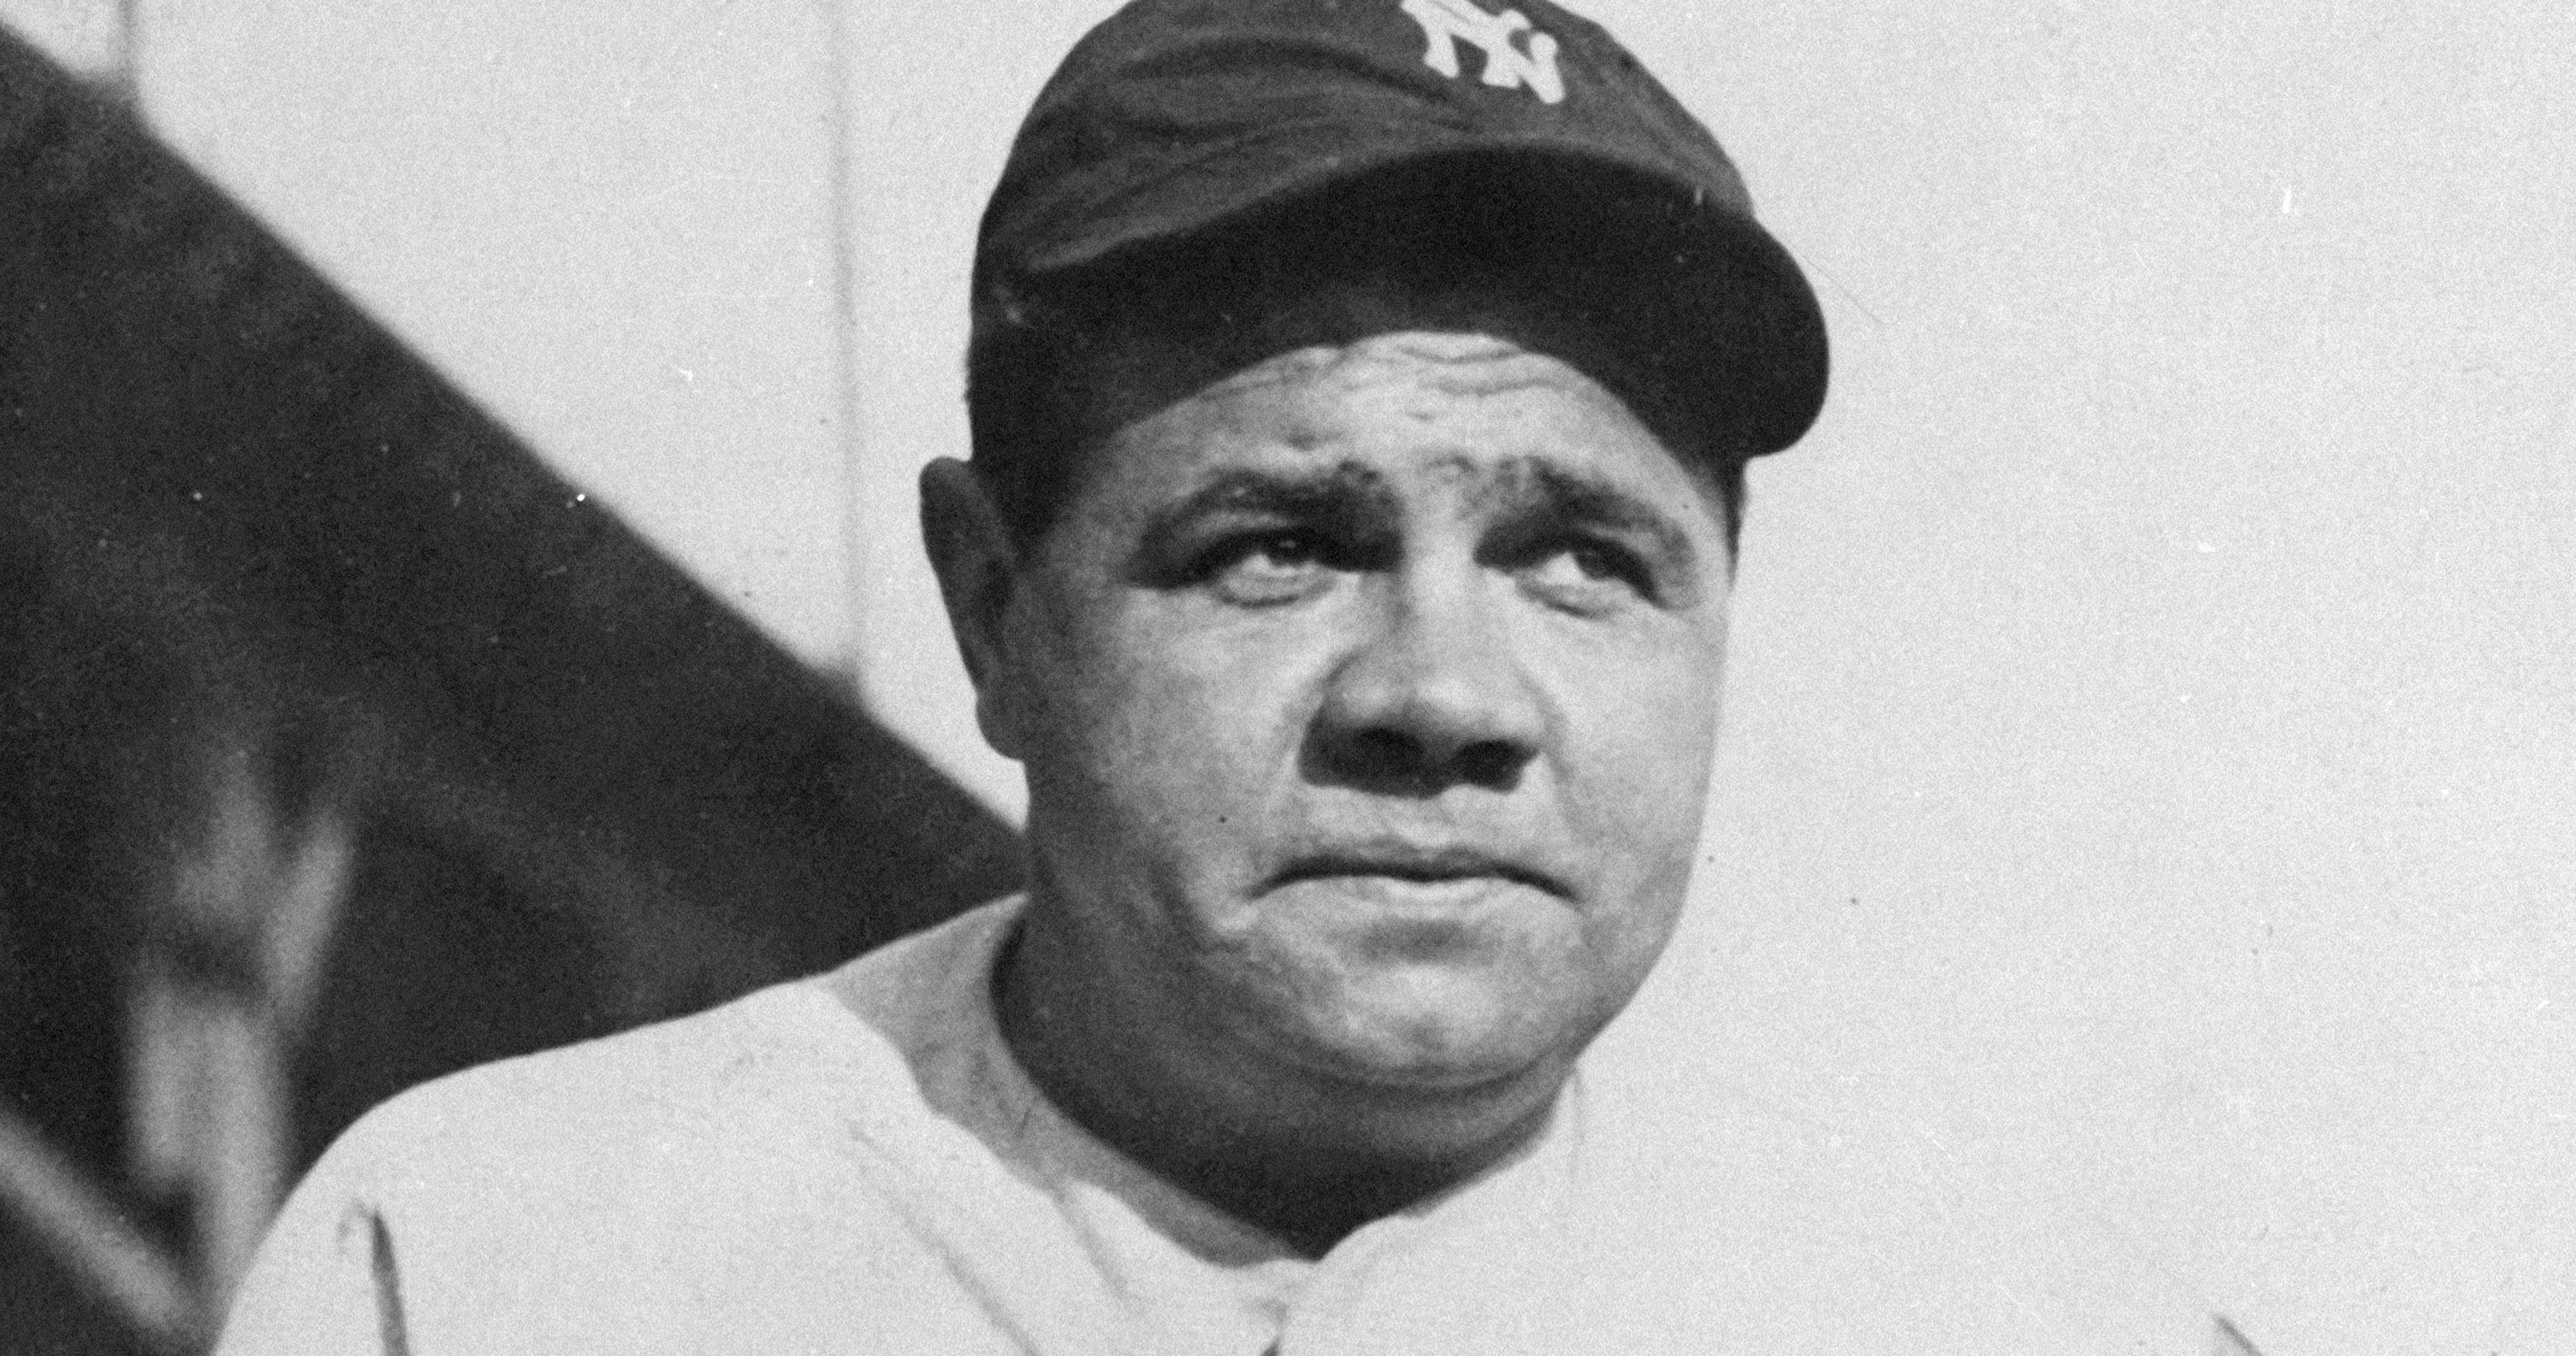 1914 Babe Ruth trading card valued at record $6 million